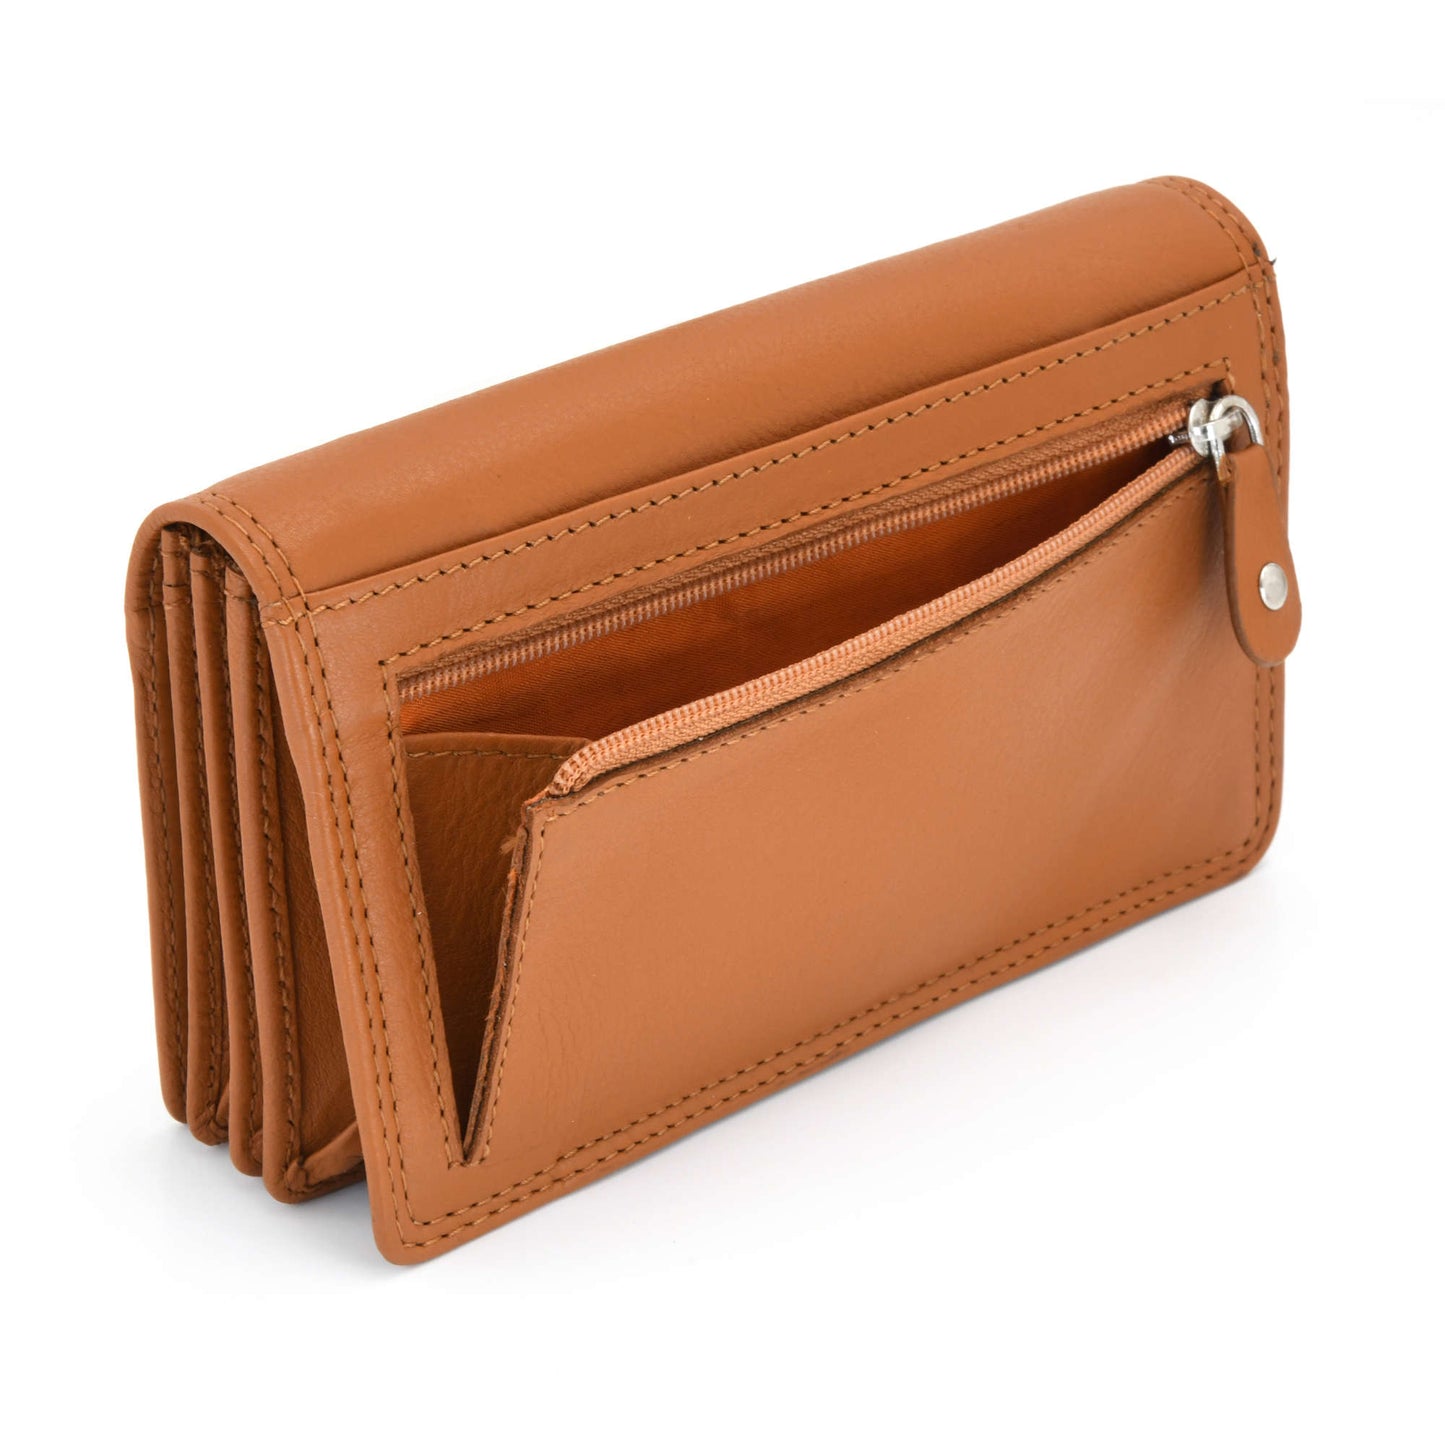 Style n Craft - 300956 Ladies Clutch Wallet in Leather - tan color - angled back view showing zipper pocket